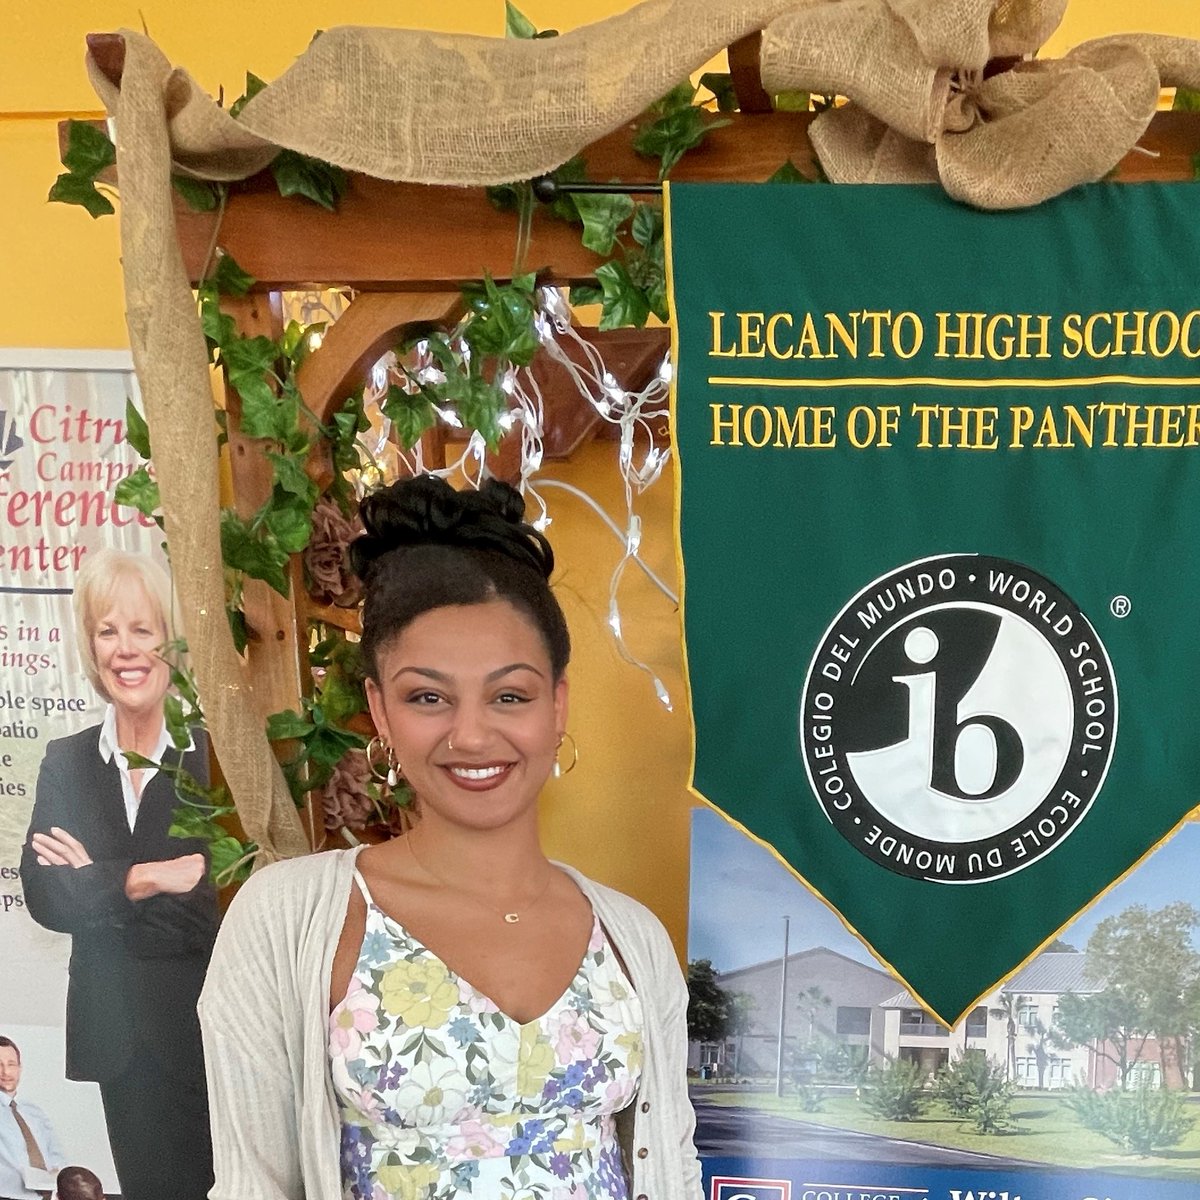 Full Circle! In 2016, @LecantoHigh IB DP Senior Cierra Richardson received the STEPS to CF Scholarship. Now, she's preparing to start her academic career at @CFedu to study Child Psychology! Thank you to CF for always supporting our students and their goals! @CitrusSchools